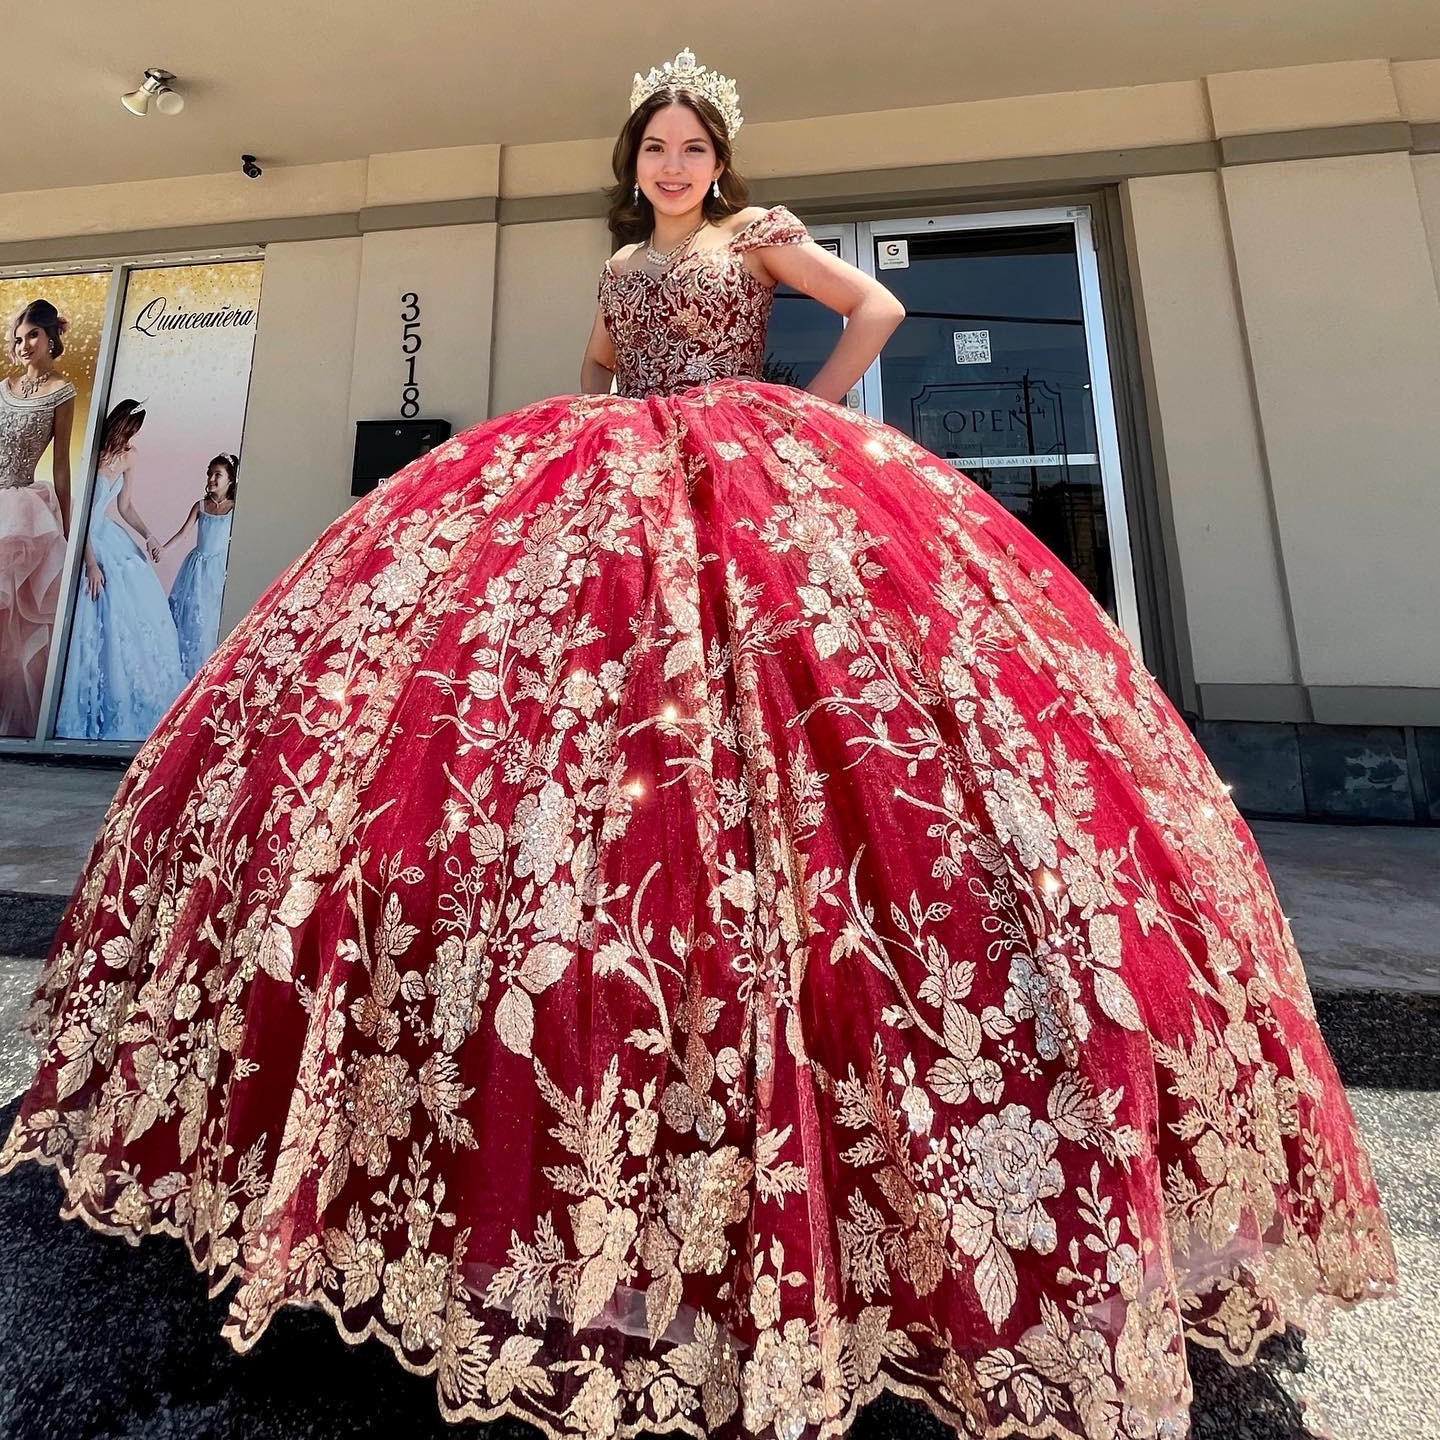 

Burgundy Gold Quinceanera Dress 2023 Straps Neck Sparkle Floral Sequins Beading Tulle Puffy Sweet 16 Gowns Vestidos De 15 Anos Lace-Up Corset Back Off-Shoulder, Same as image